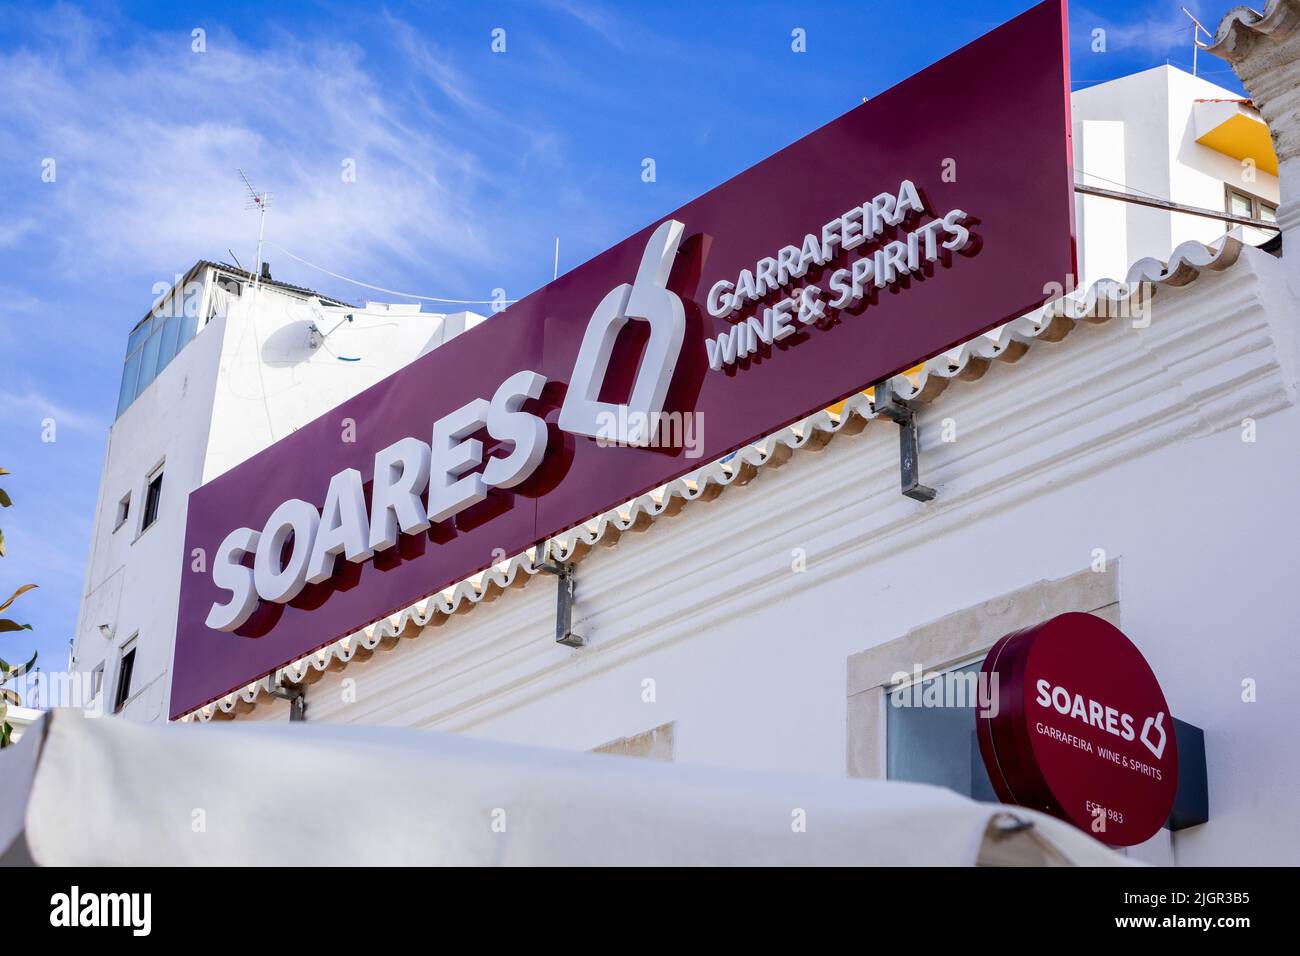 Soares Wine And Spirits Shop Sign In Albufeira Old Town The Algarve Portugal  Portuguese Wine Merchant Off License Stock Photo